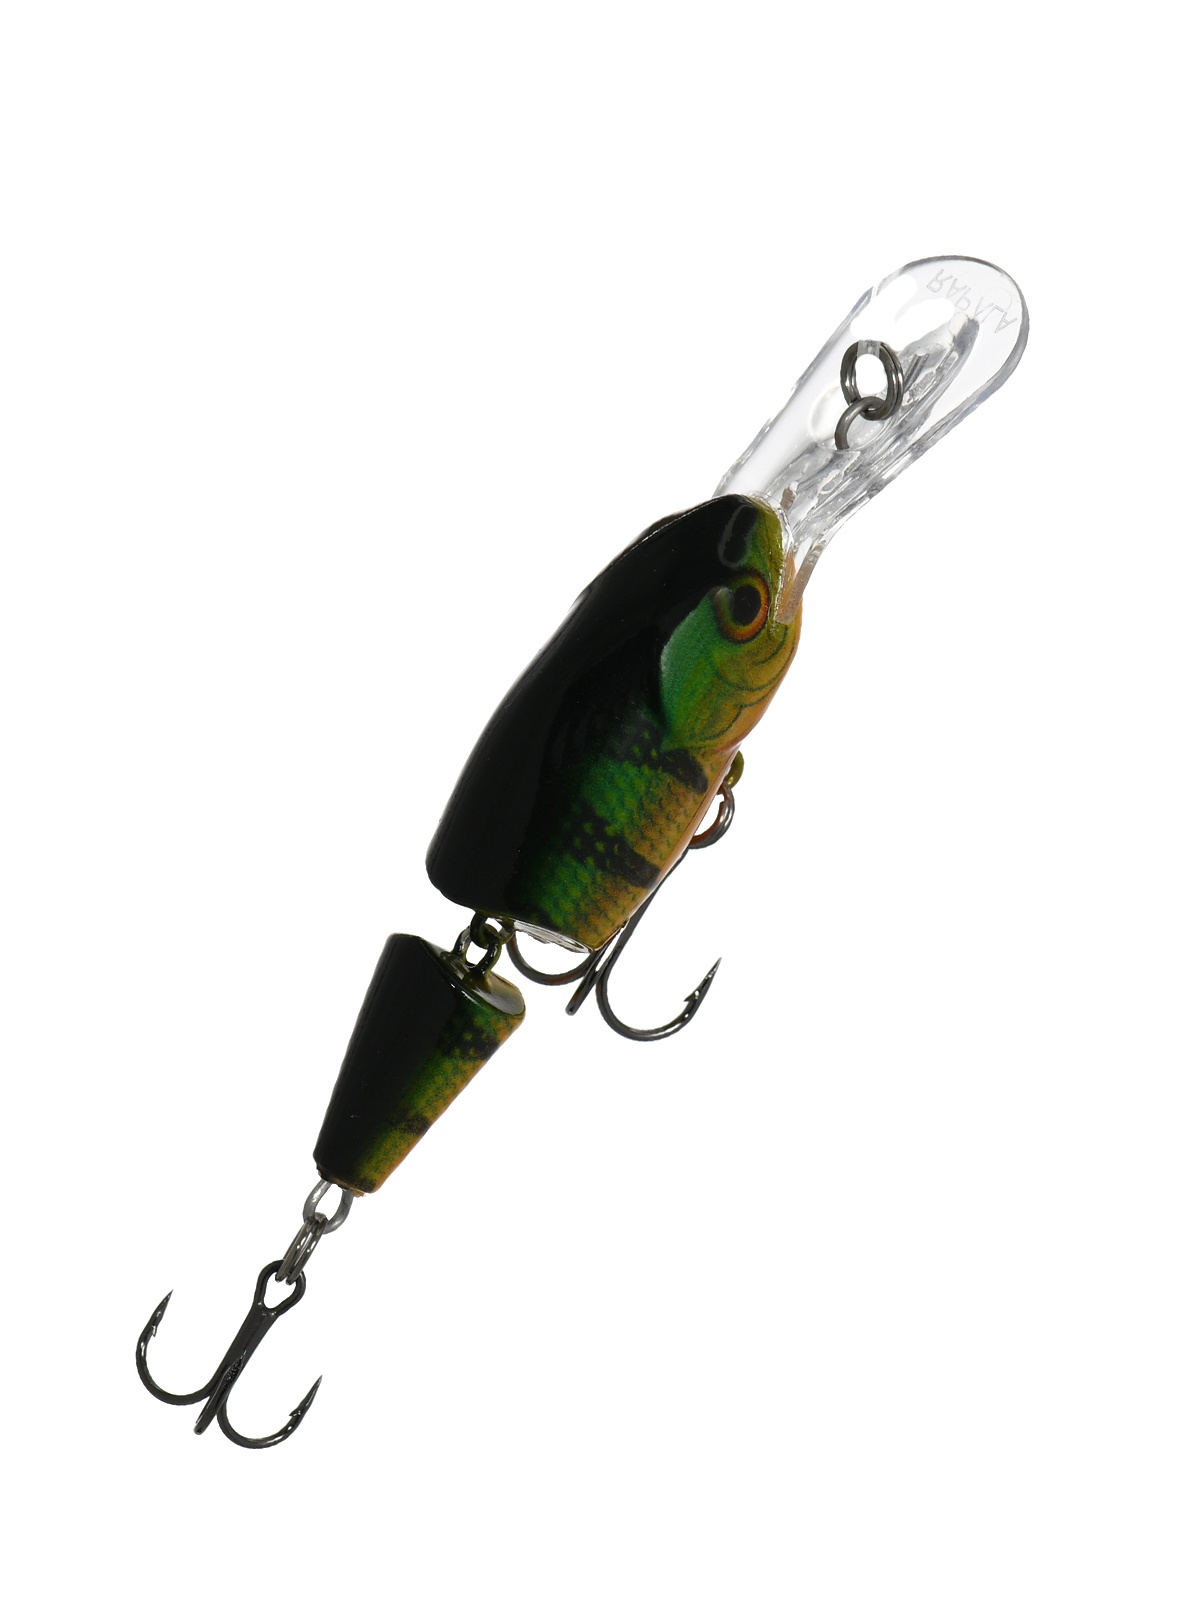 JSR04 P Jointed Shad Rap